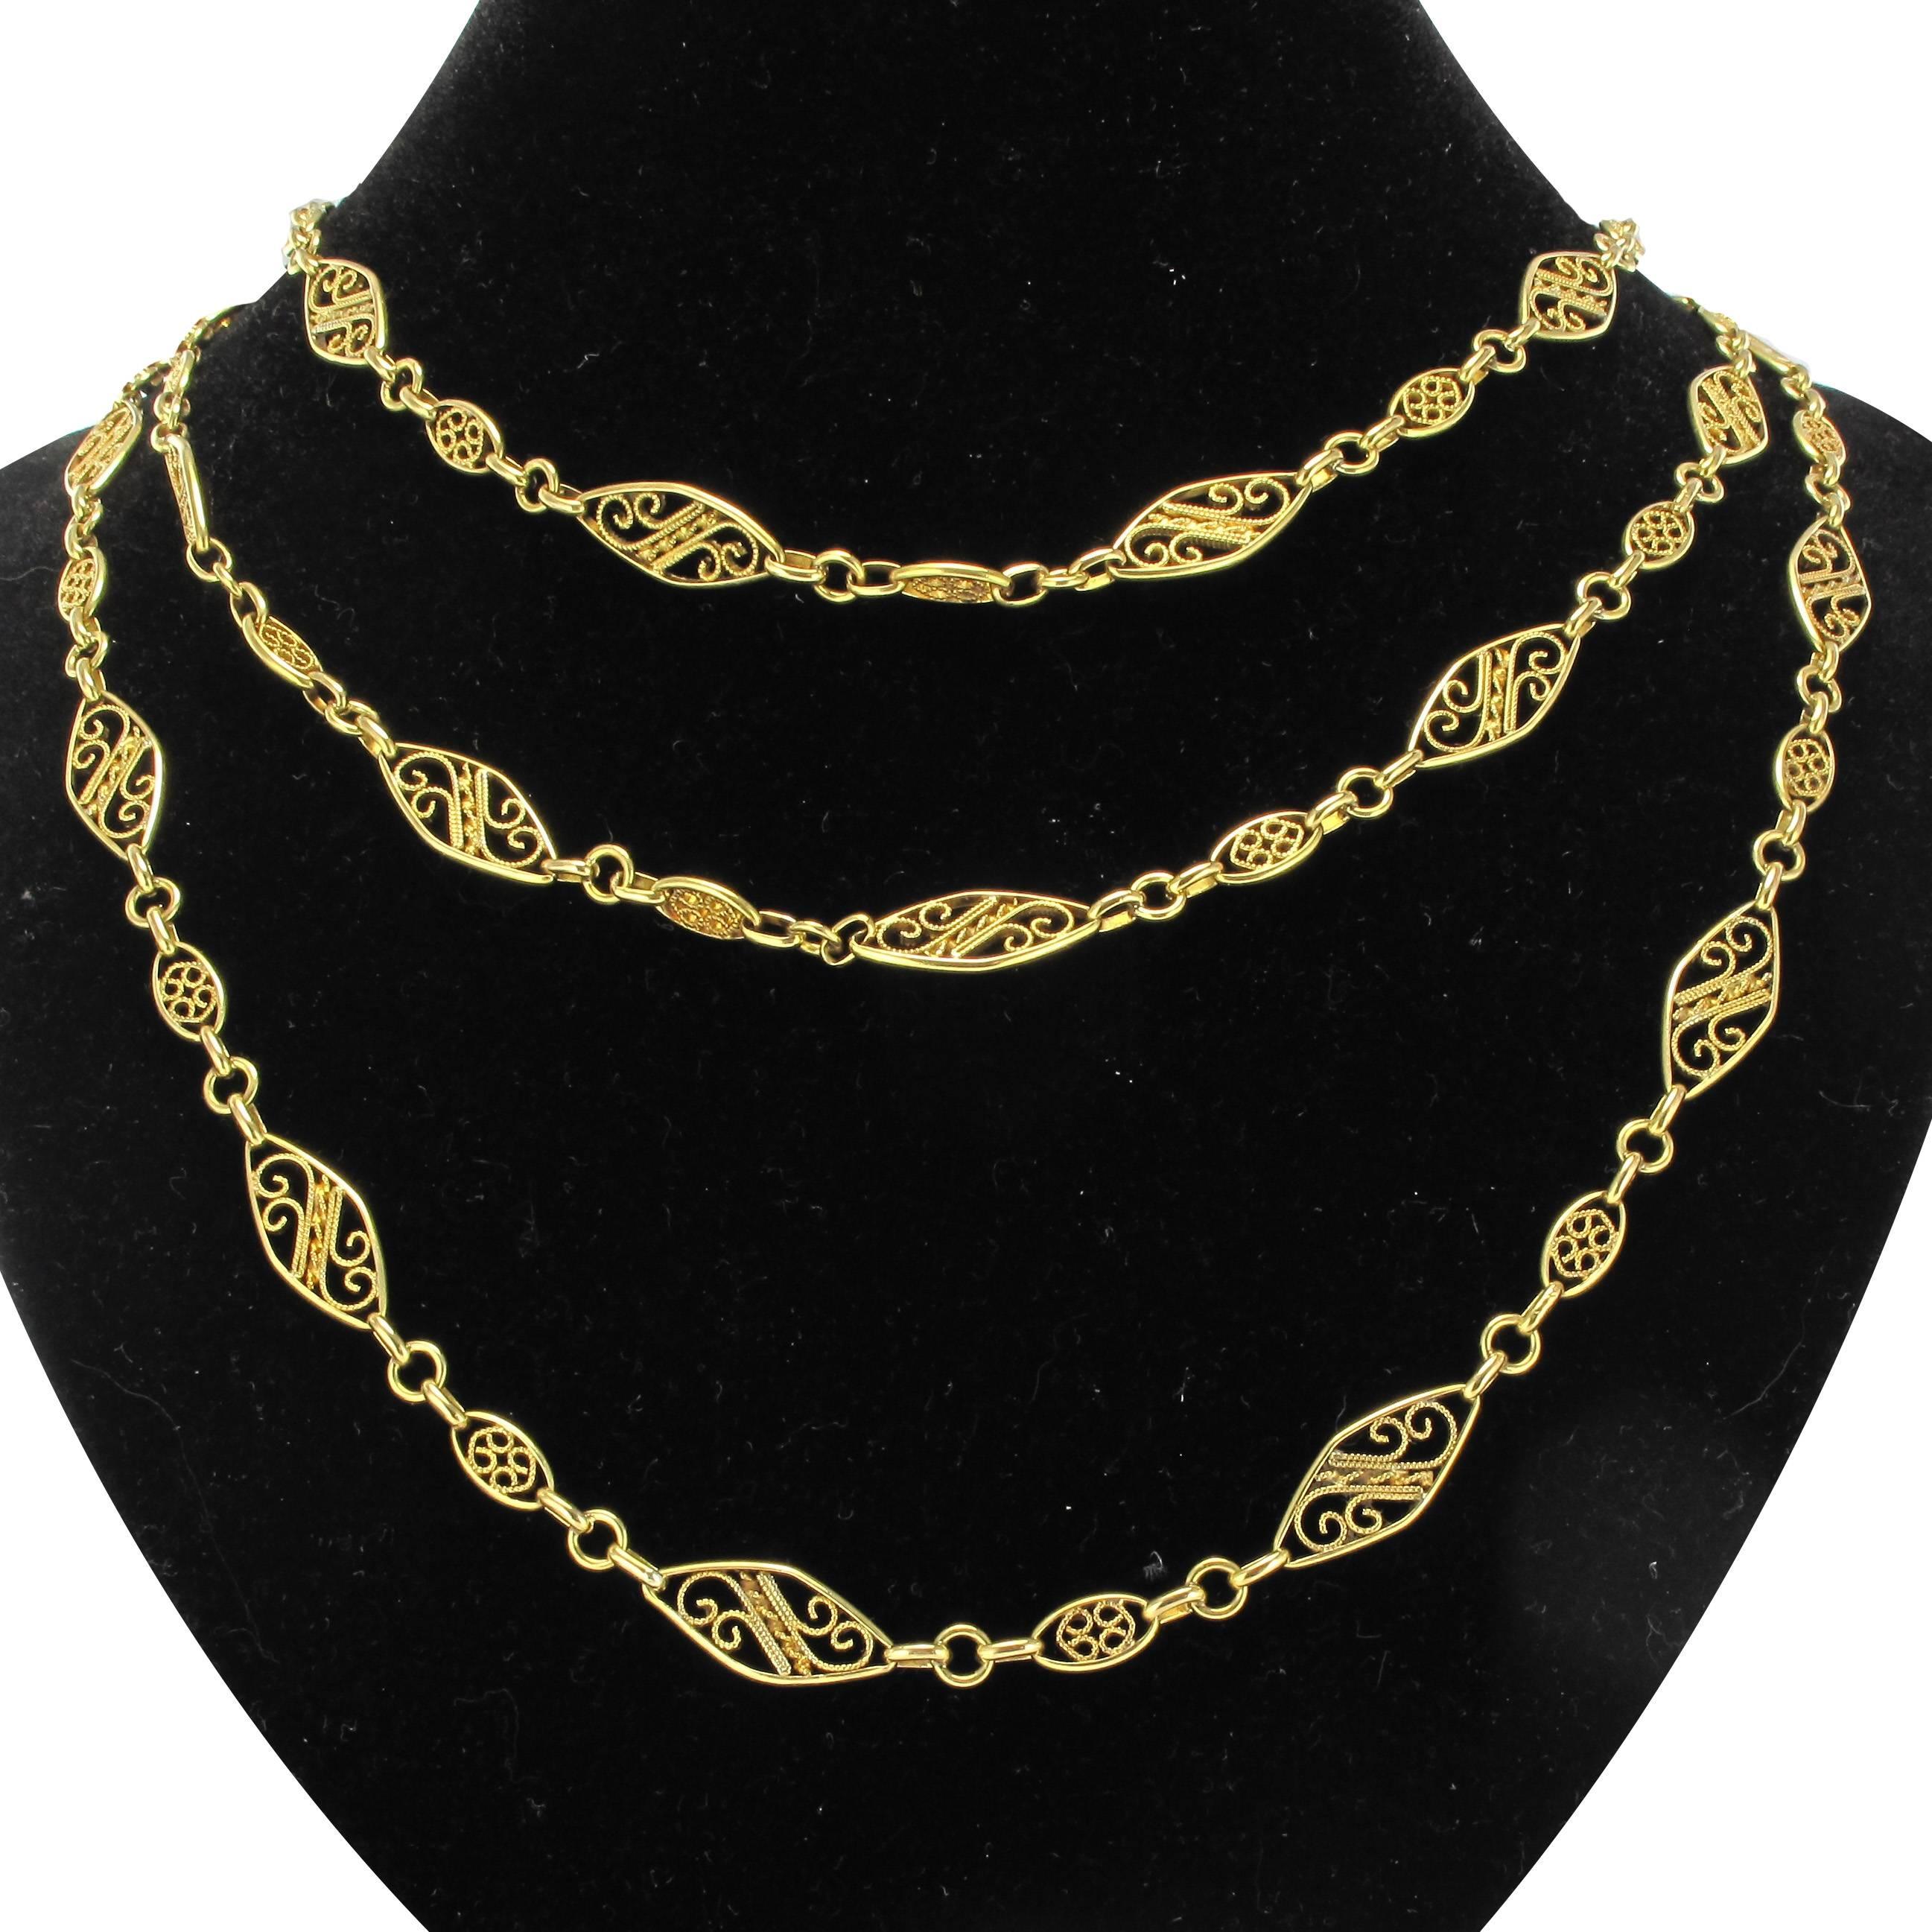 18 carat yellow gold necklace, eagle head and rhinoceros hallmarks.

Splendid antique necklace composed of a gold chain with alternative shuttle filigree and golden agraphes. It features a spring ring clasp. 

Overall length: 156.5 cm, width of the